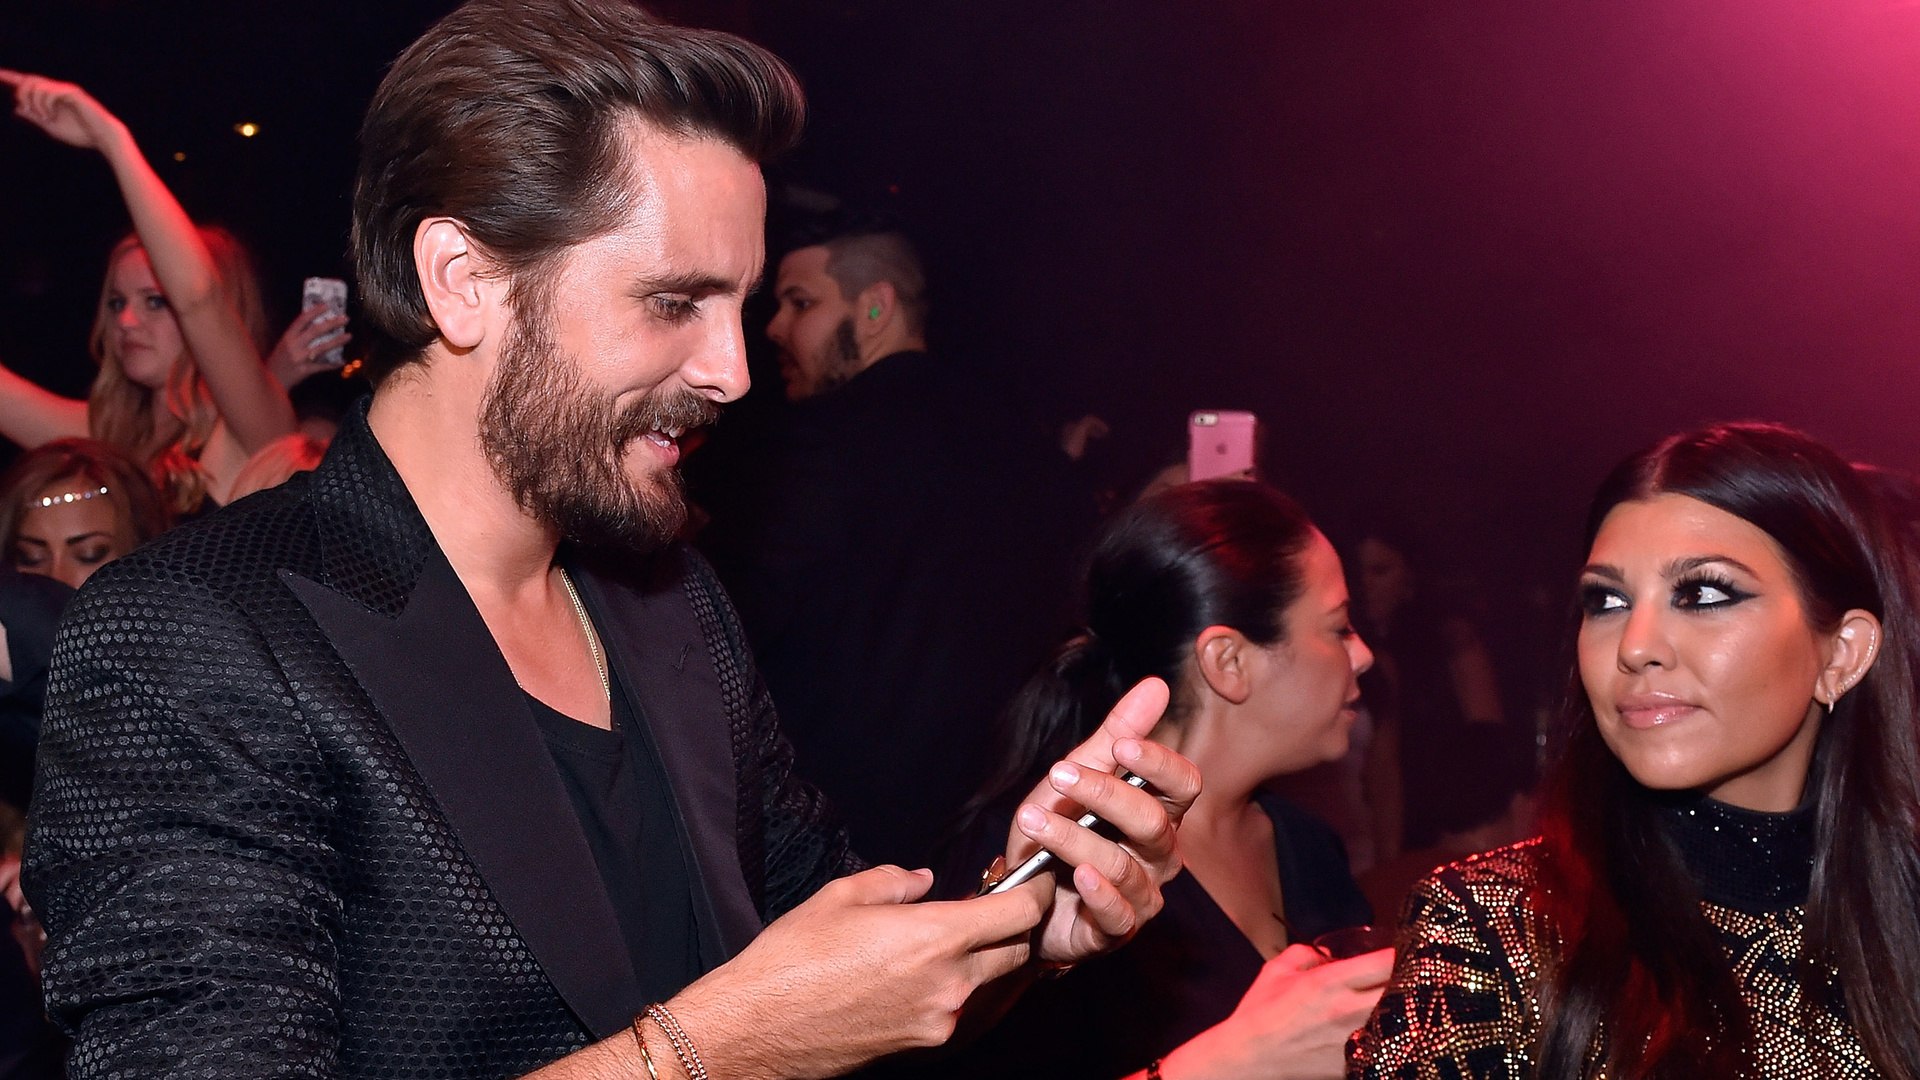 Kourtney Kardashian Seems Really Worried About Scott Disick In This KUWTK Promo And More News